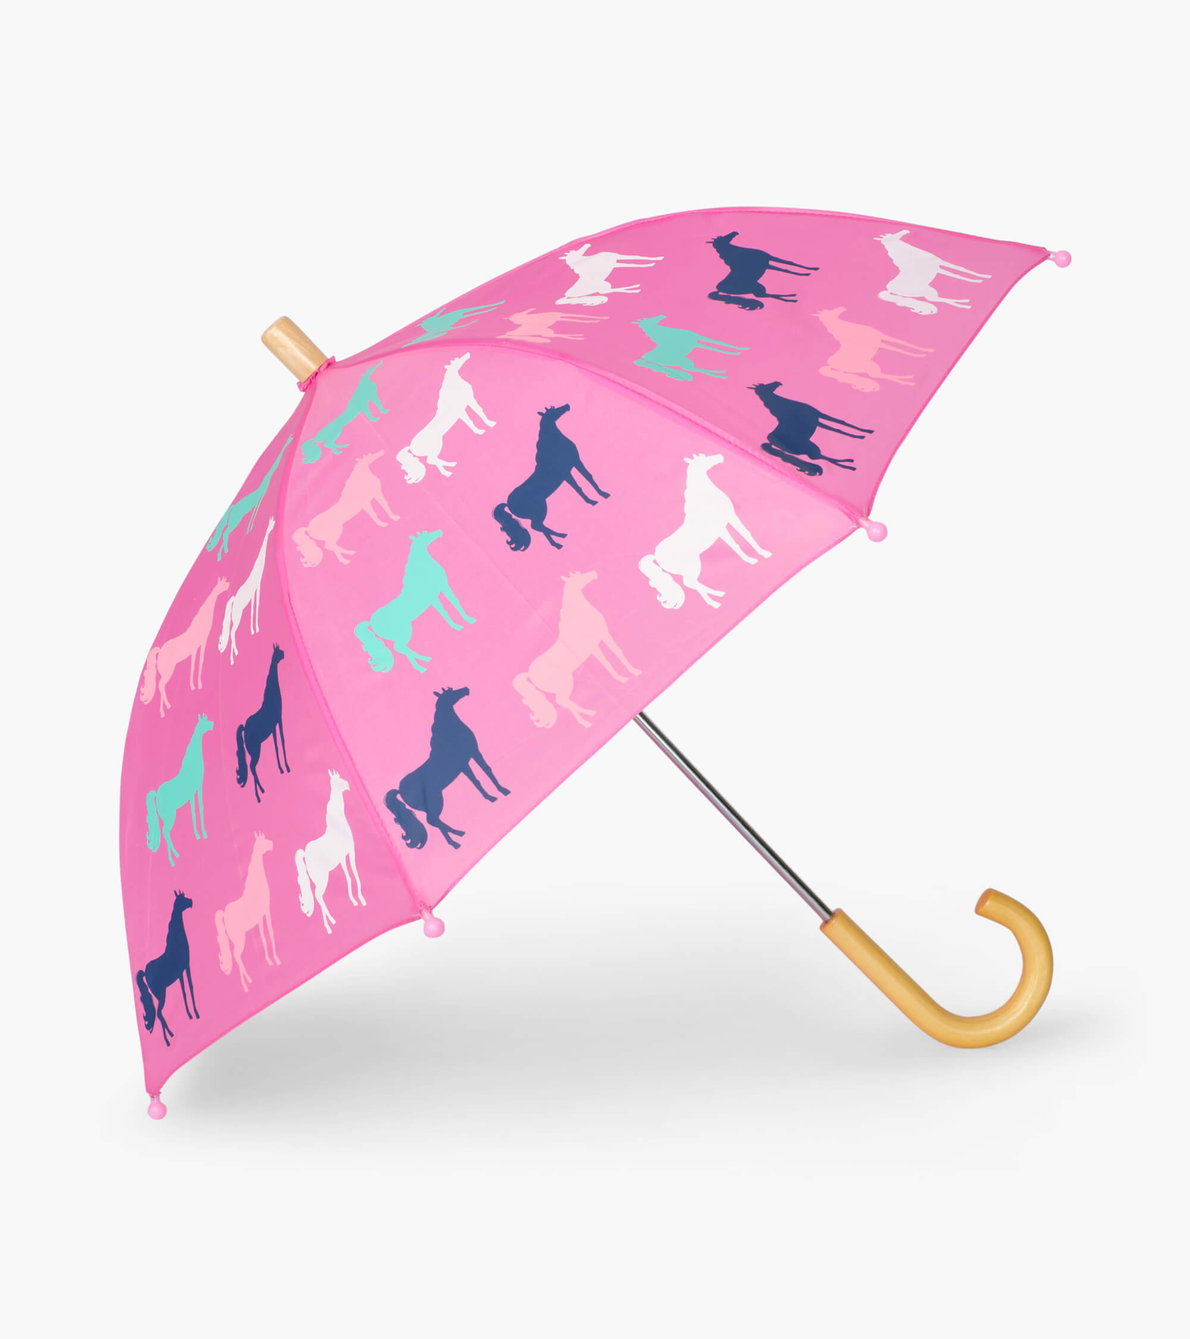 View larger image of Horse Silhouettes Umbrella